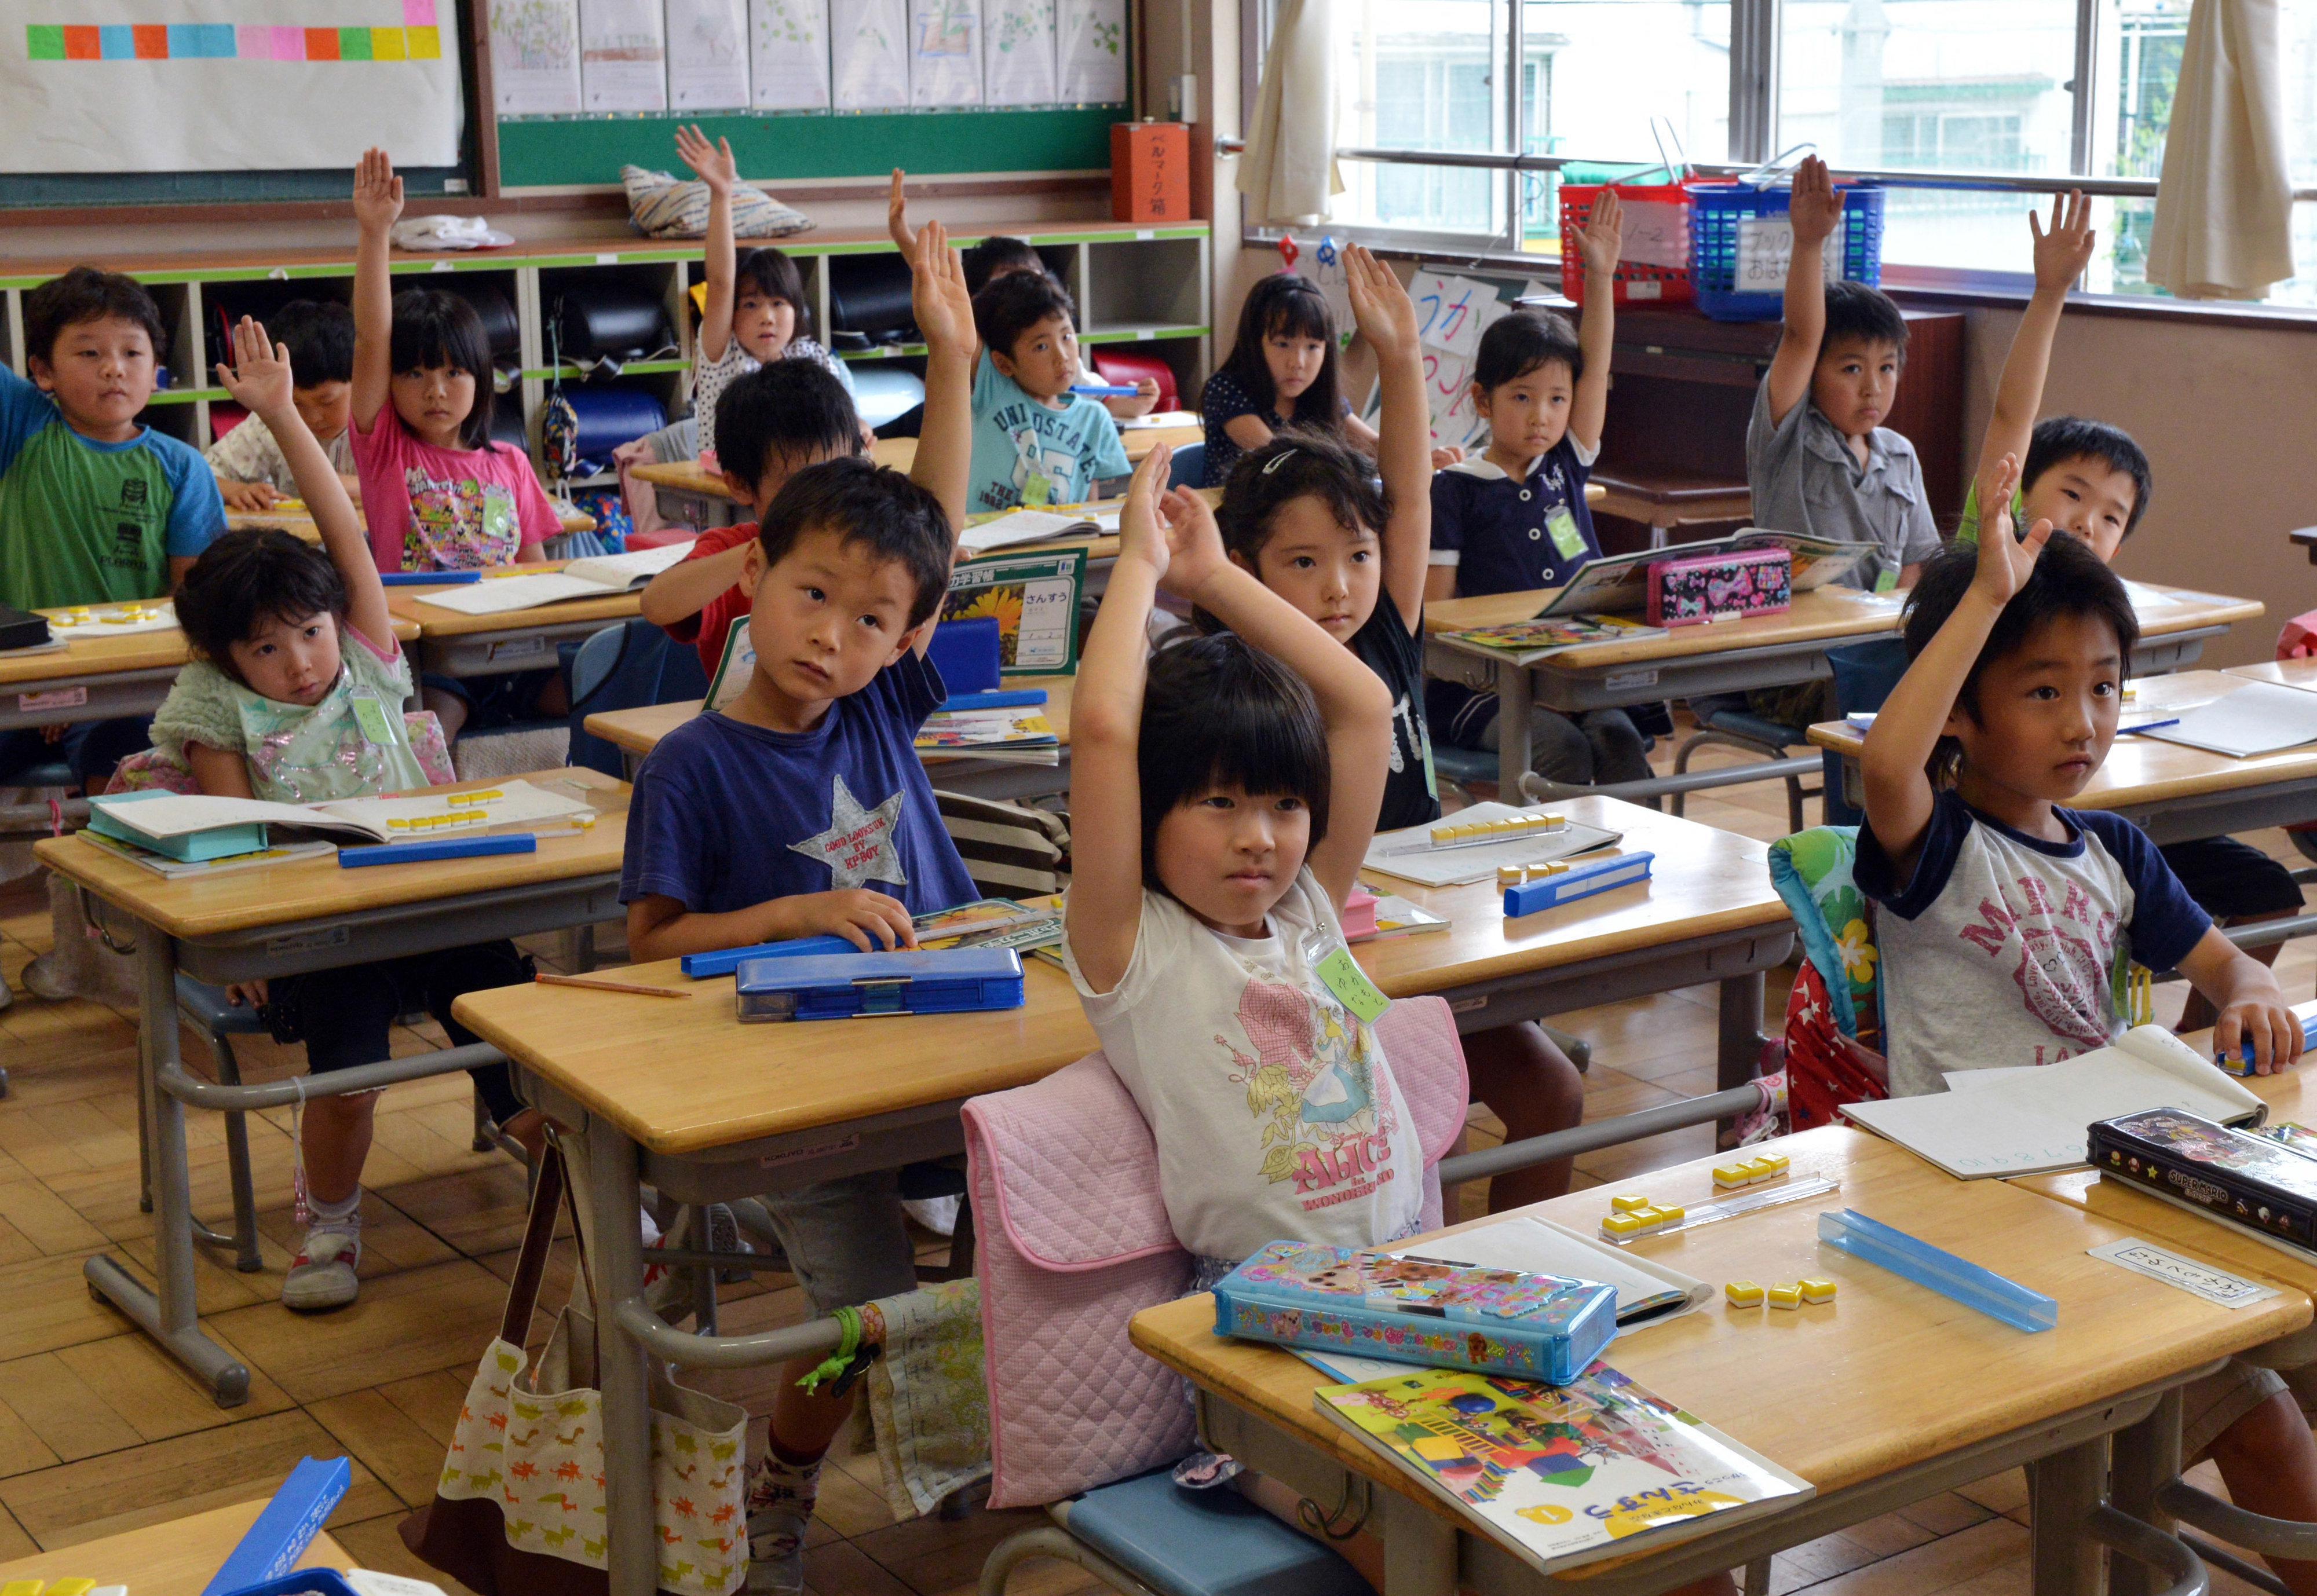 Group of children raising hands in a classroom setting